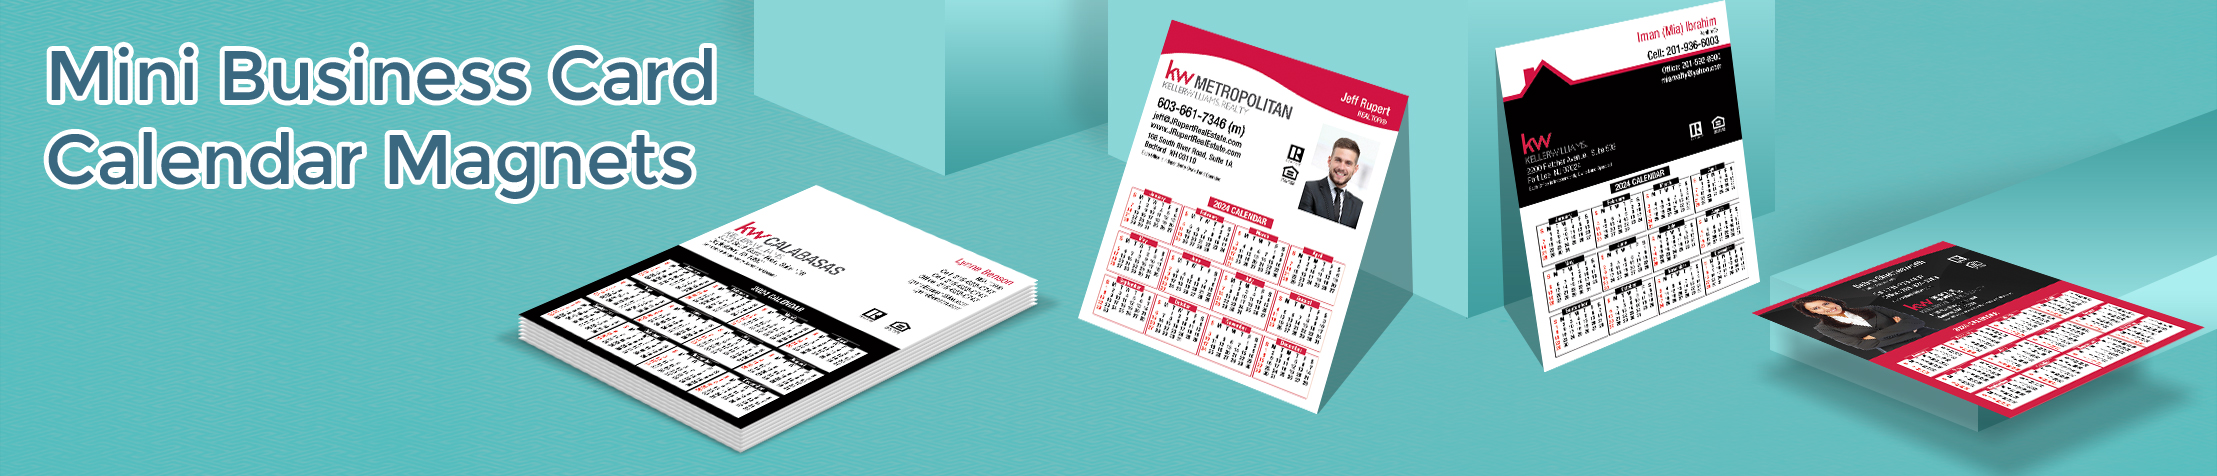 Keller Williams Real Estate Mini Business Card Calendar Magnets - KW approved vendor 2019 calendars with photo and contact info, 3.5” by 4.25” | BestPrintBuy.com